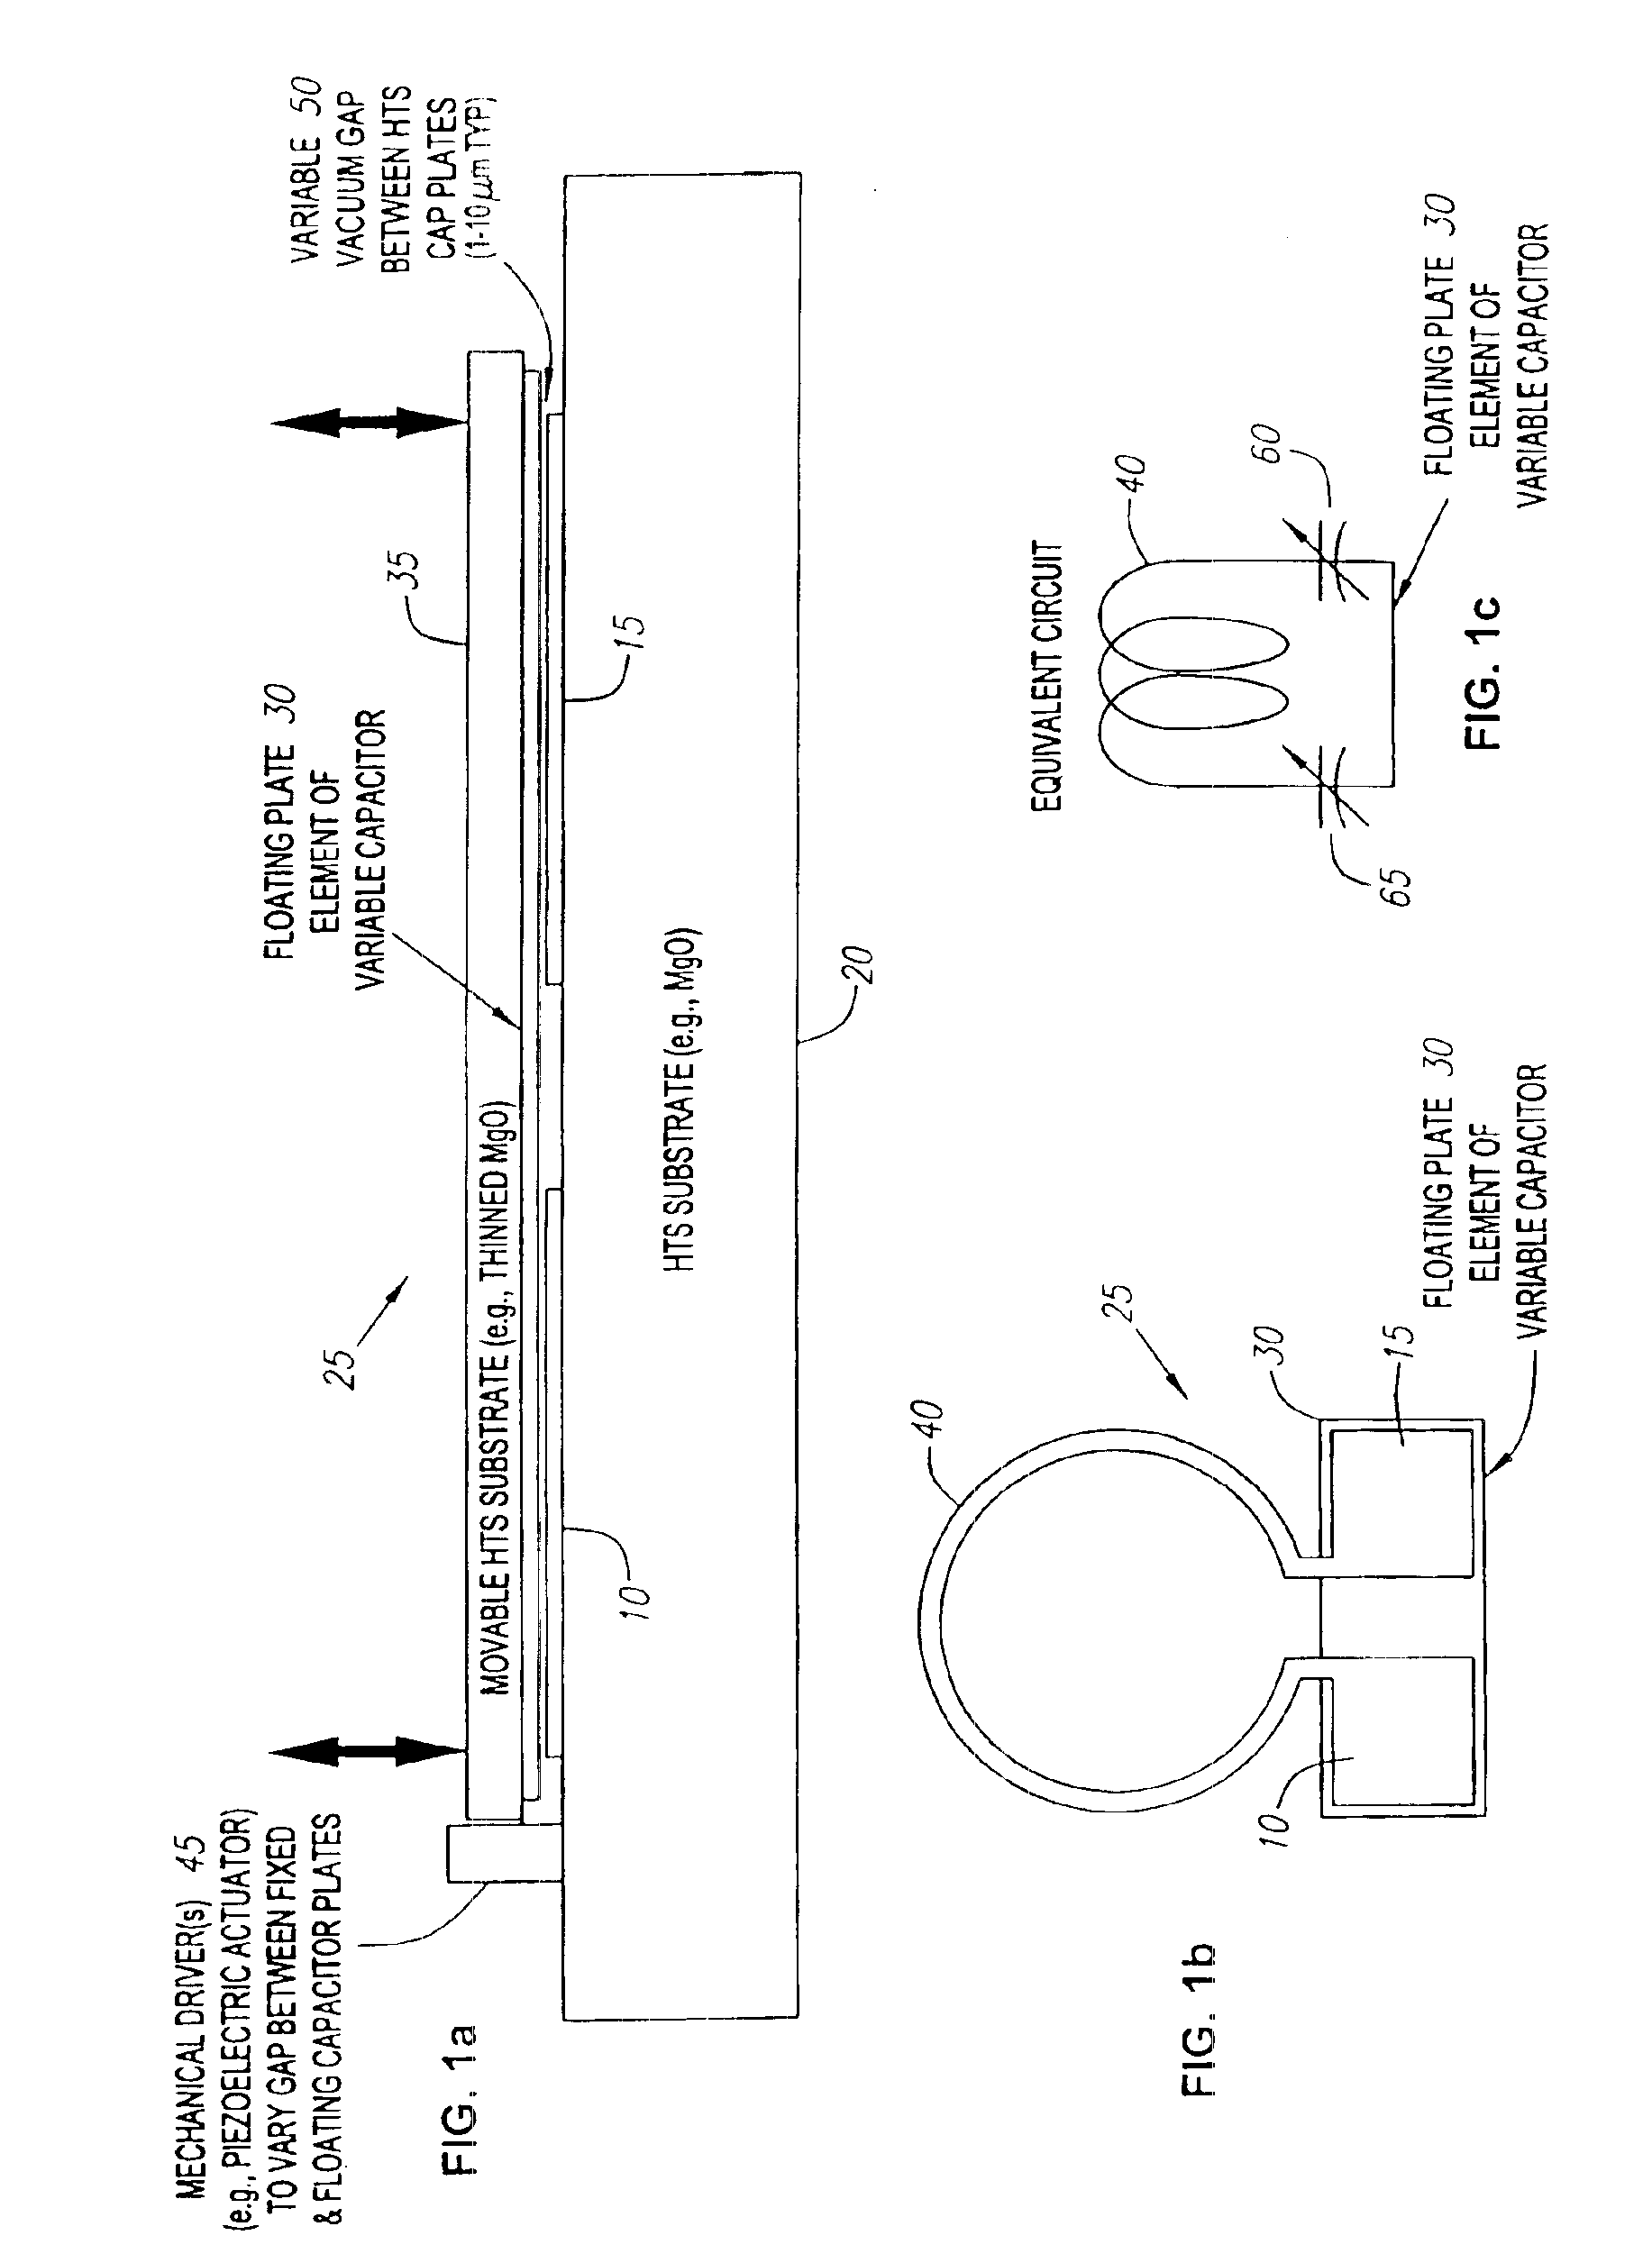 High temperature superconducting tunable filter with an adjustable capacitance gap